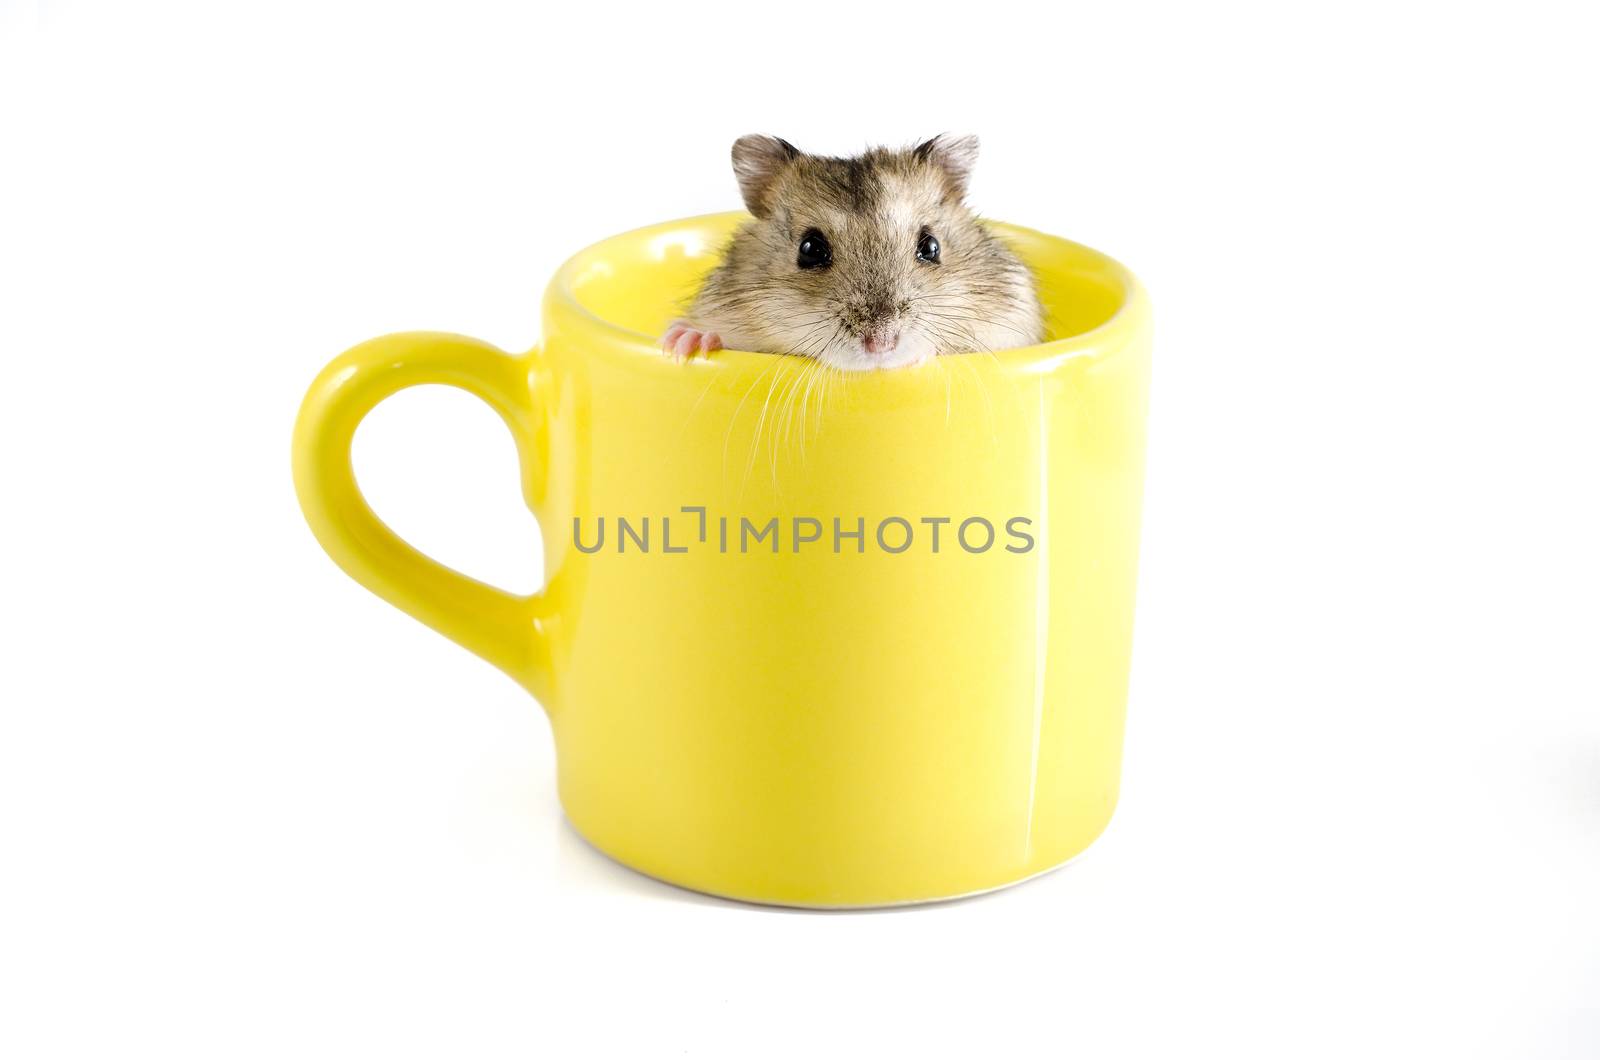 Little hamster sitting inside a yellow cup